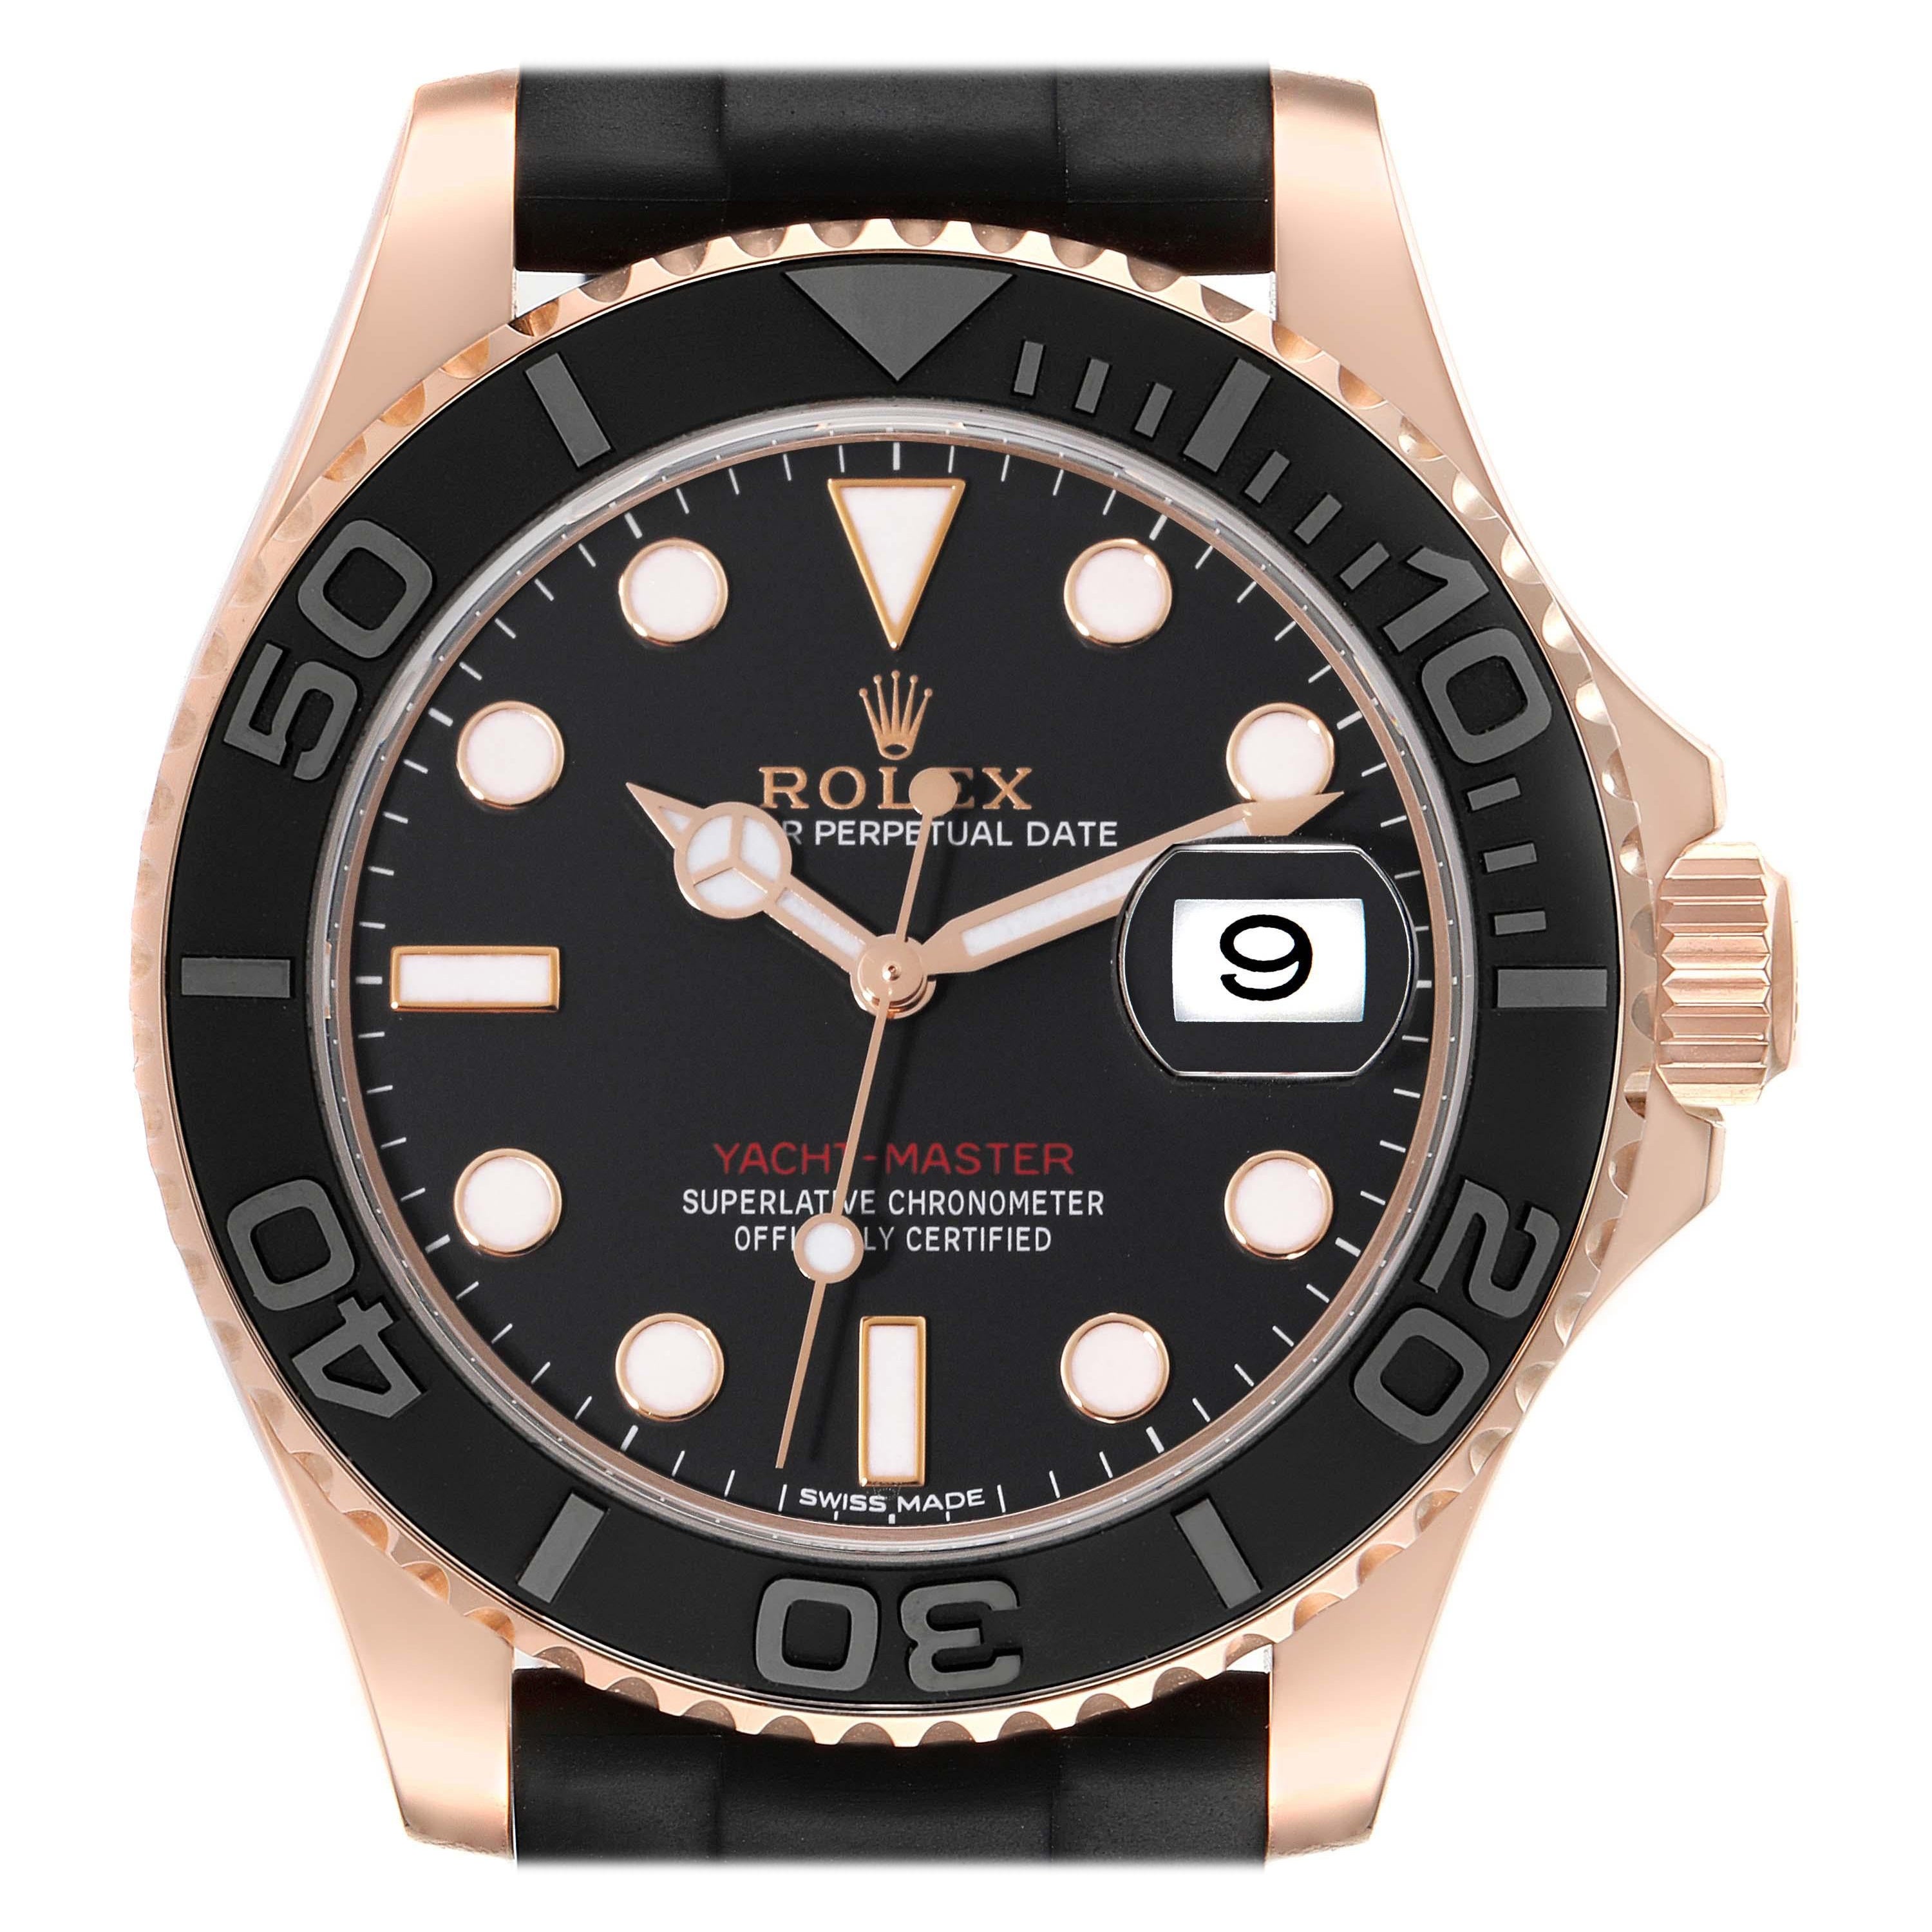 Rolex Yachtmaster 40mm Rose Gold Oysterflex Bracelet Mens Watch 116655 Box Card For Sale